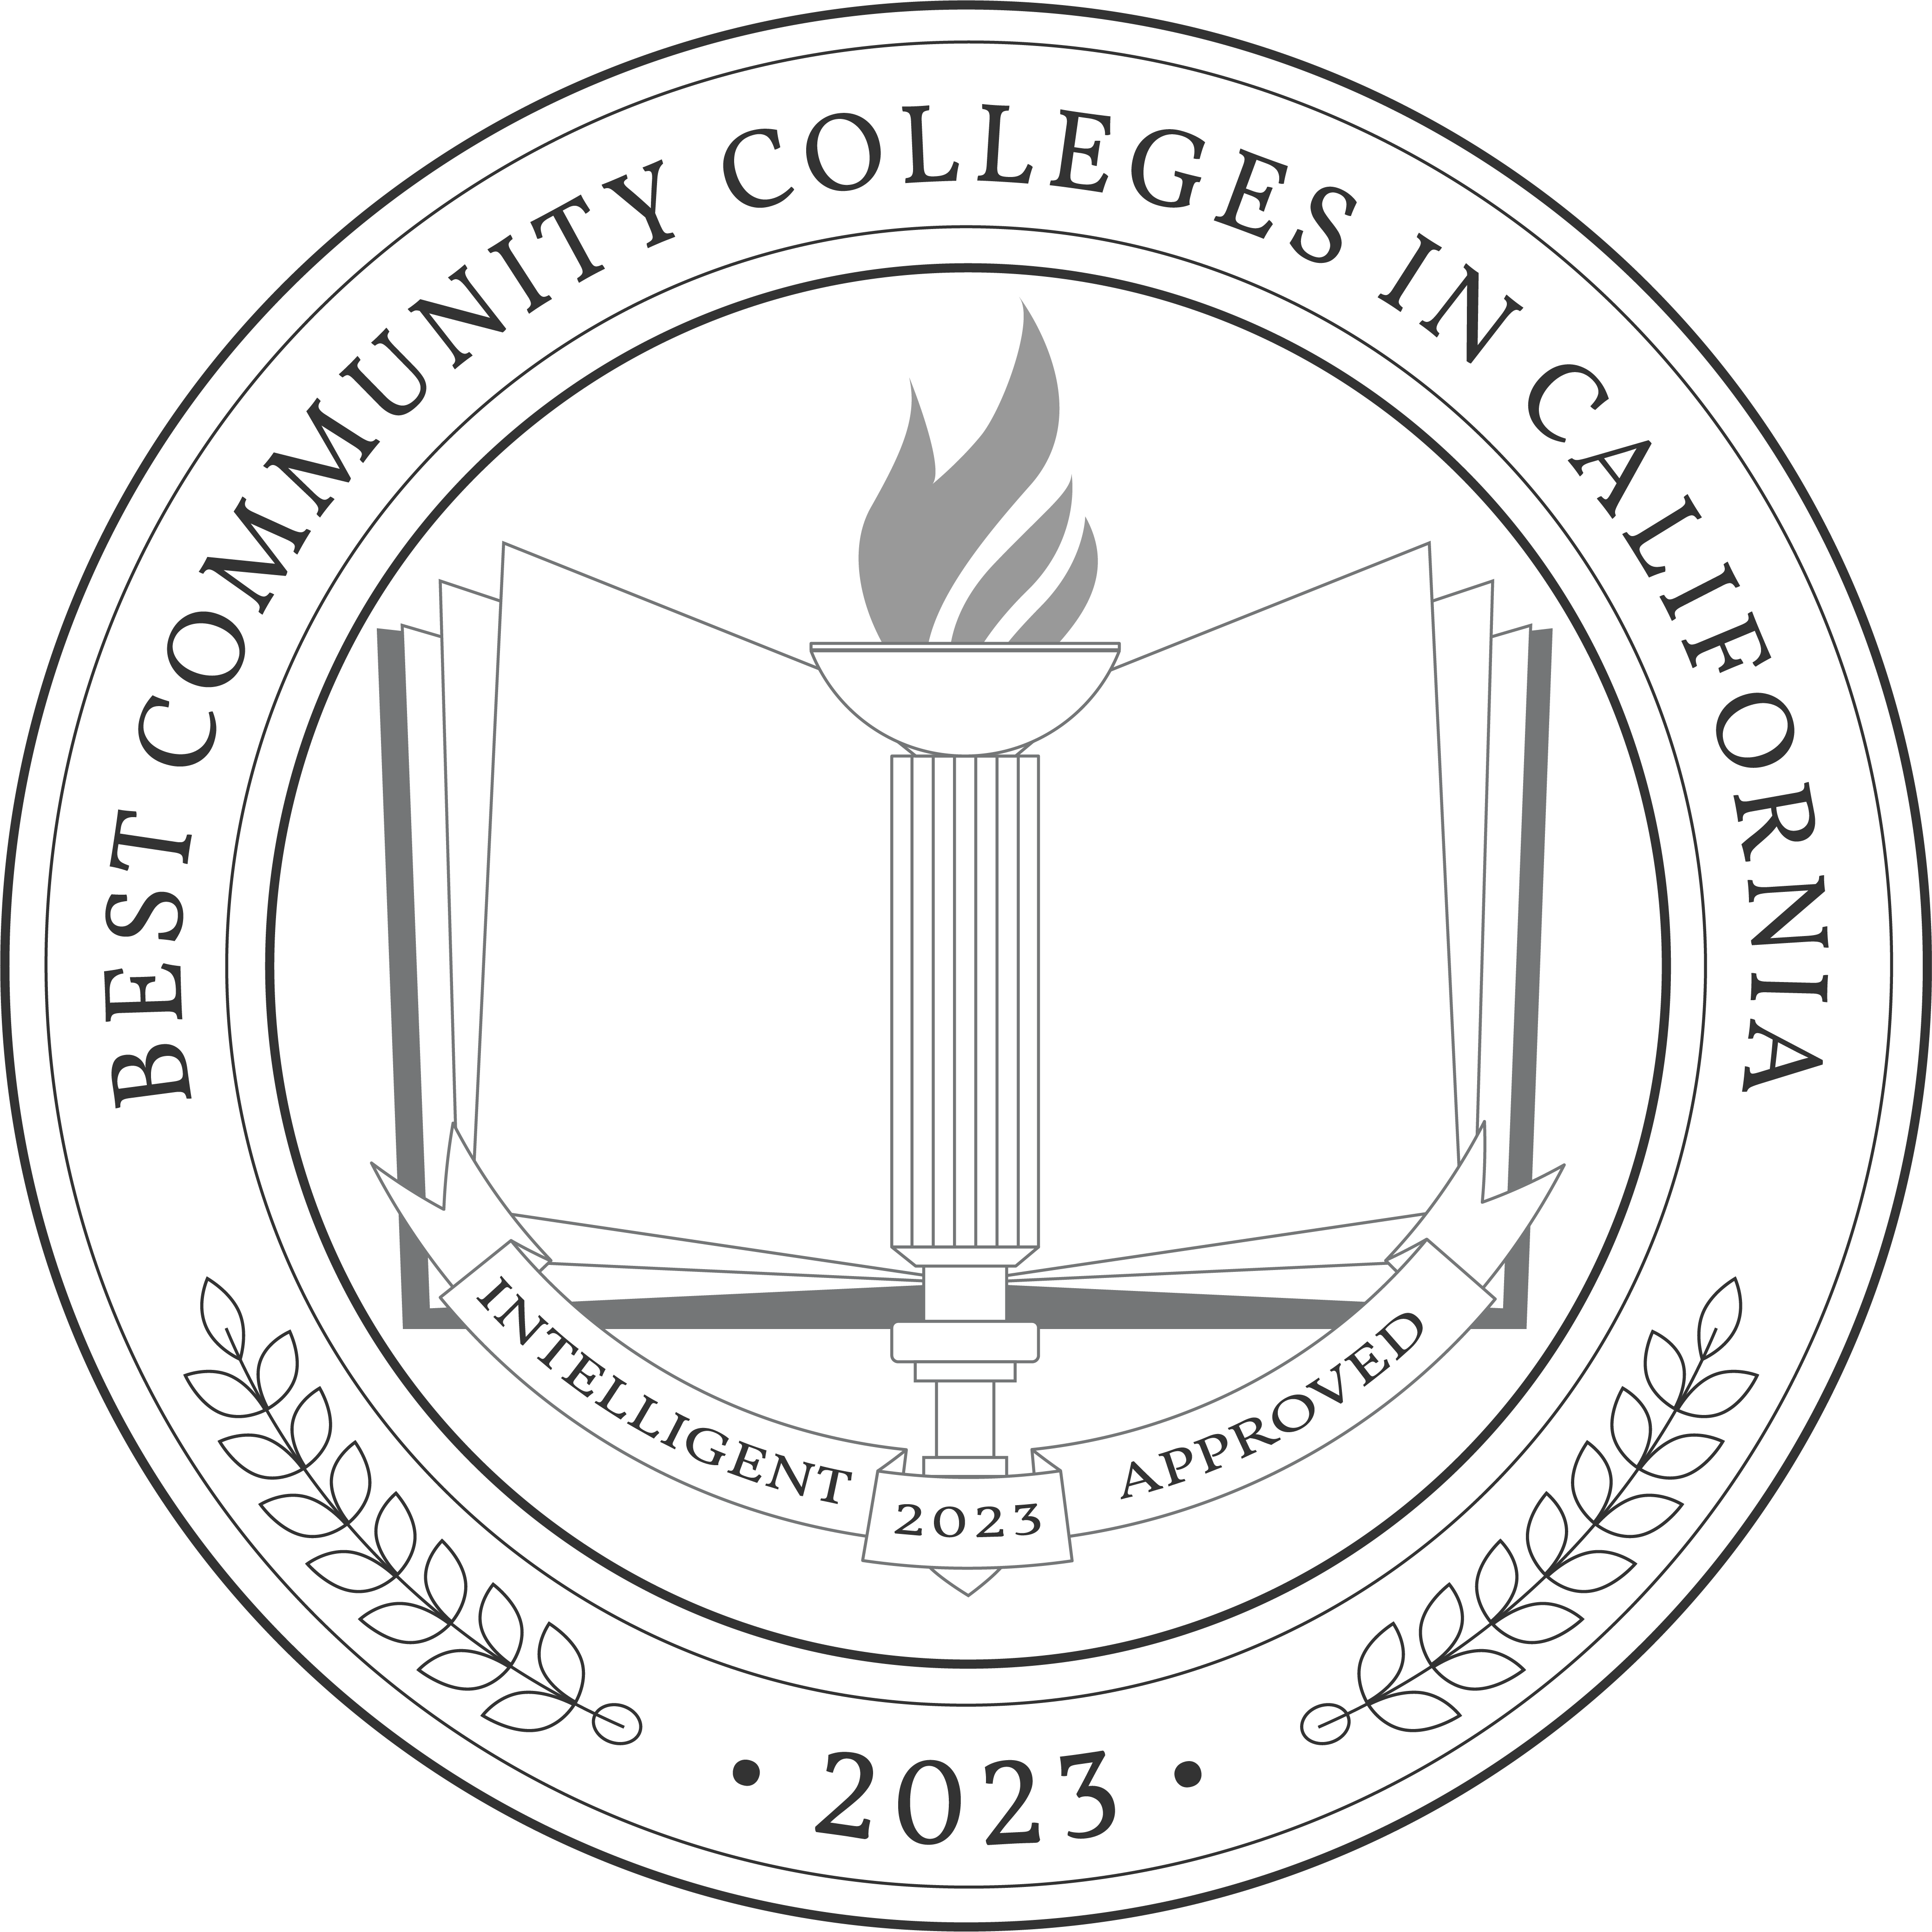 Best community colleges in California award